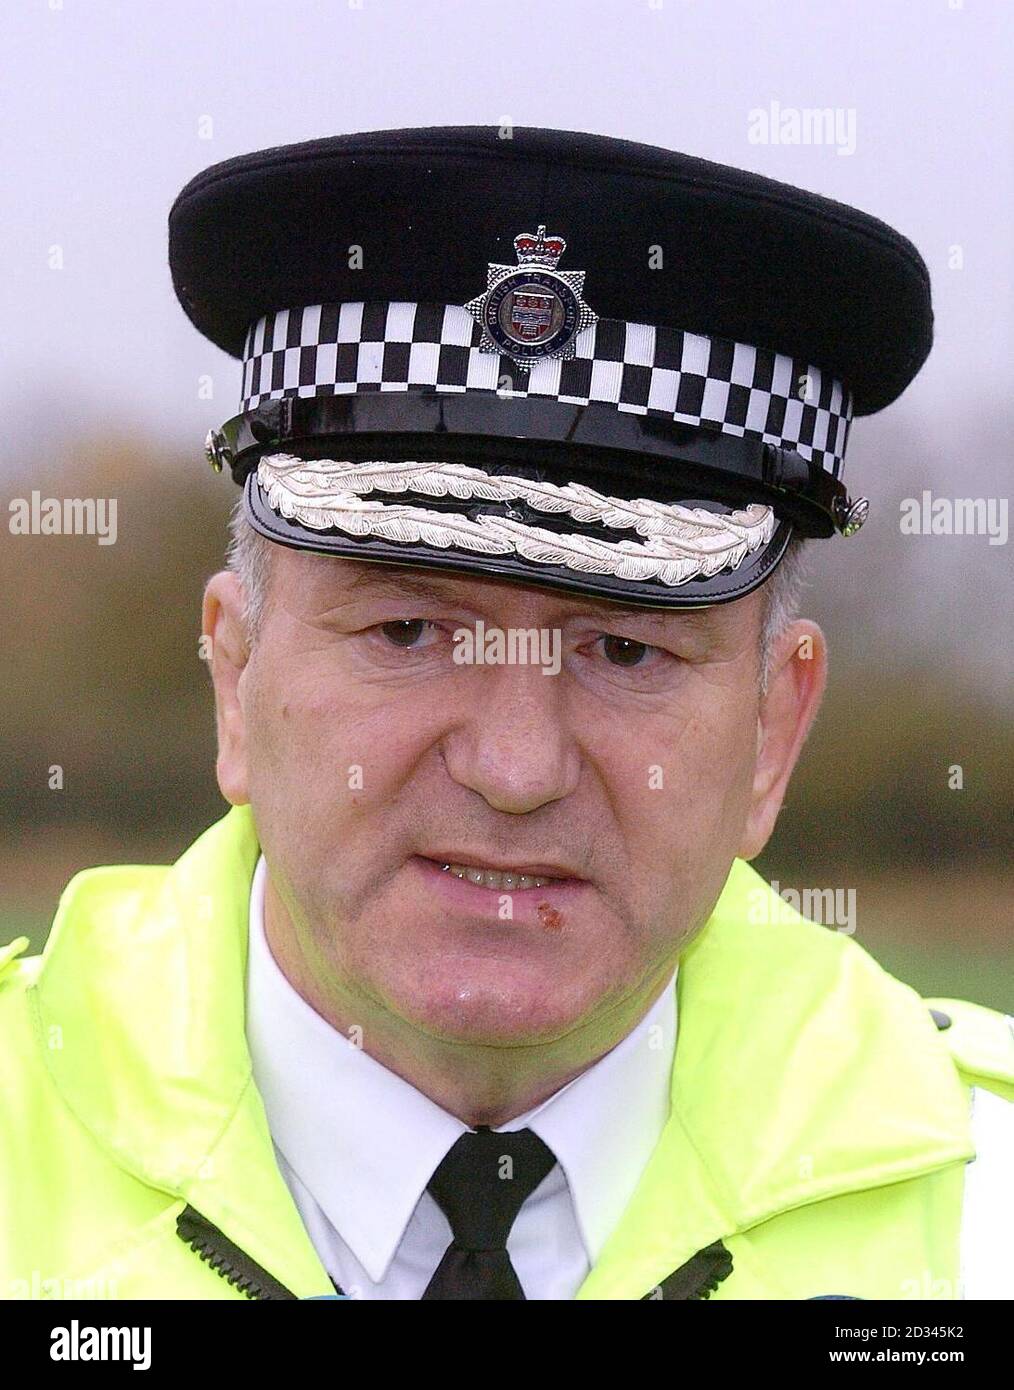 British transport Police deputy chief constable Andy Trotter at the scene of the rail accident in Ufton Nervet in Berkshire, where six people were killed and 11 seriously injured after a high-speed train hit a car on a level crossing and derailed, yesterday at around 6.30pm. The deputy chief constable said 'It's remarkable that so many people managed to escape from such an awful event.' Stock Photo